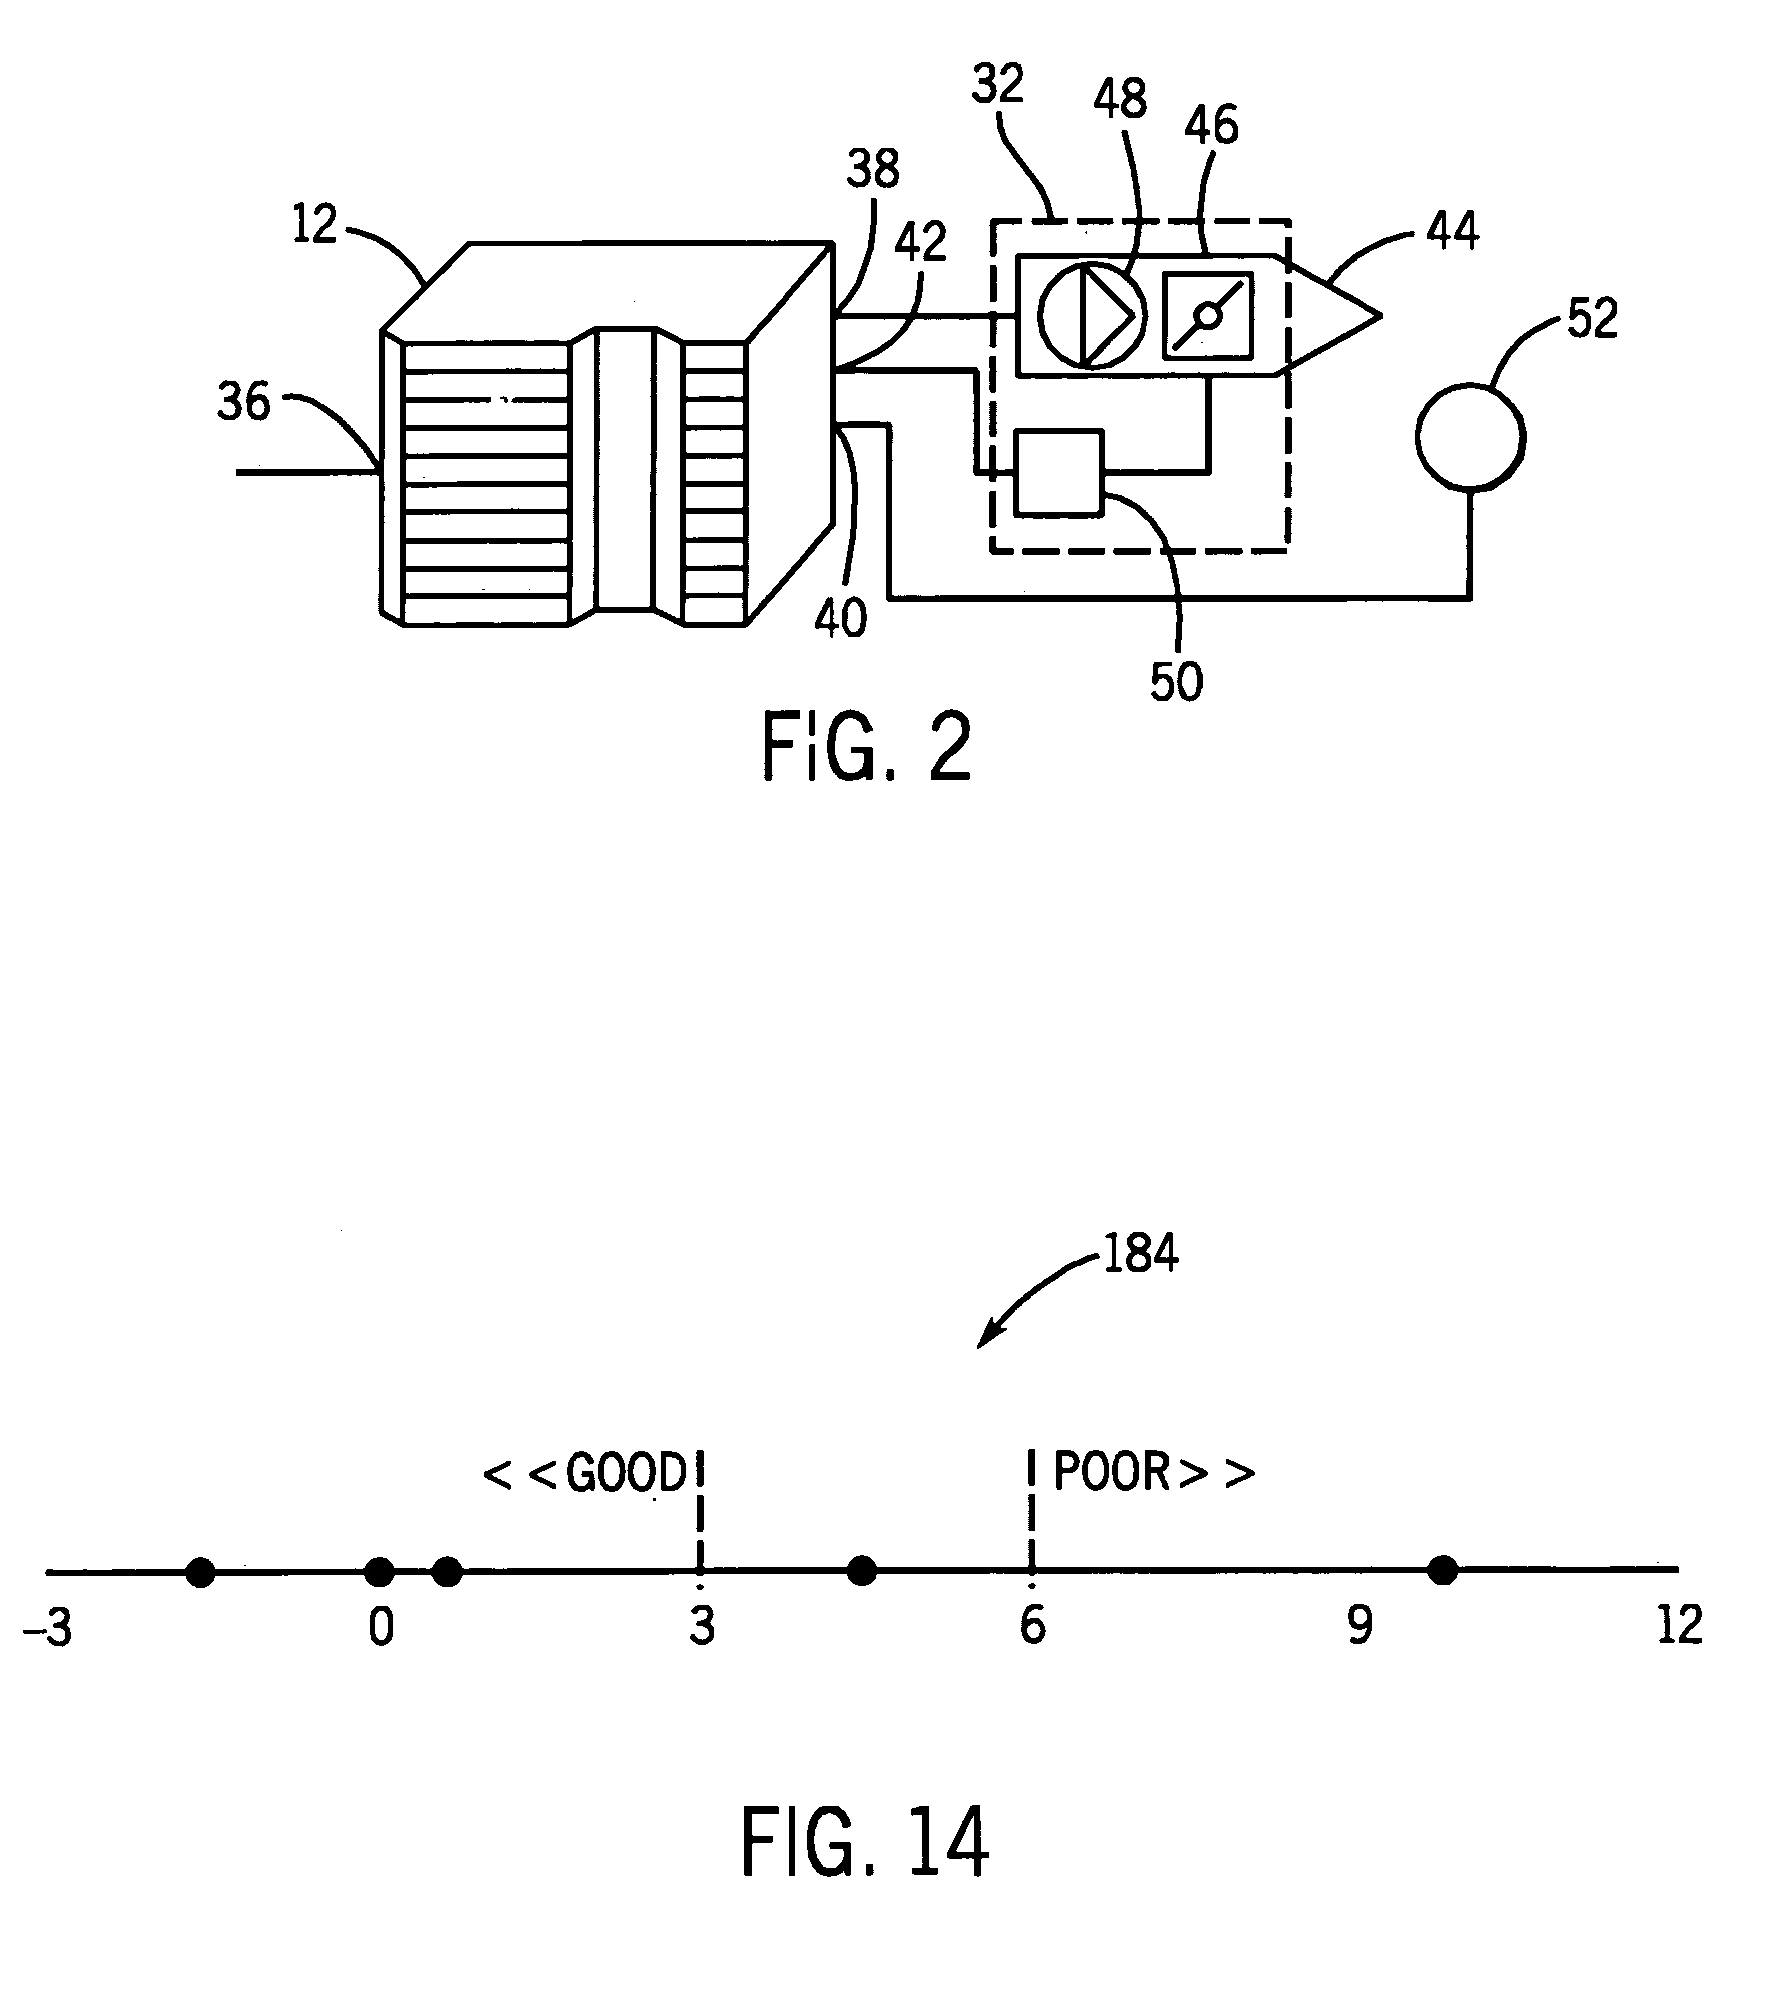 Method and apparatus for assessing performance of an environmental control system